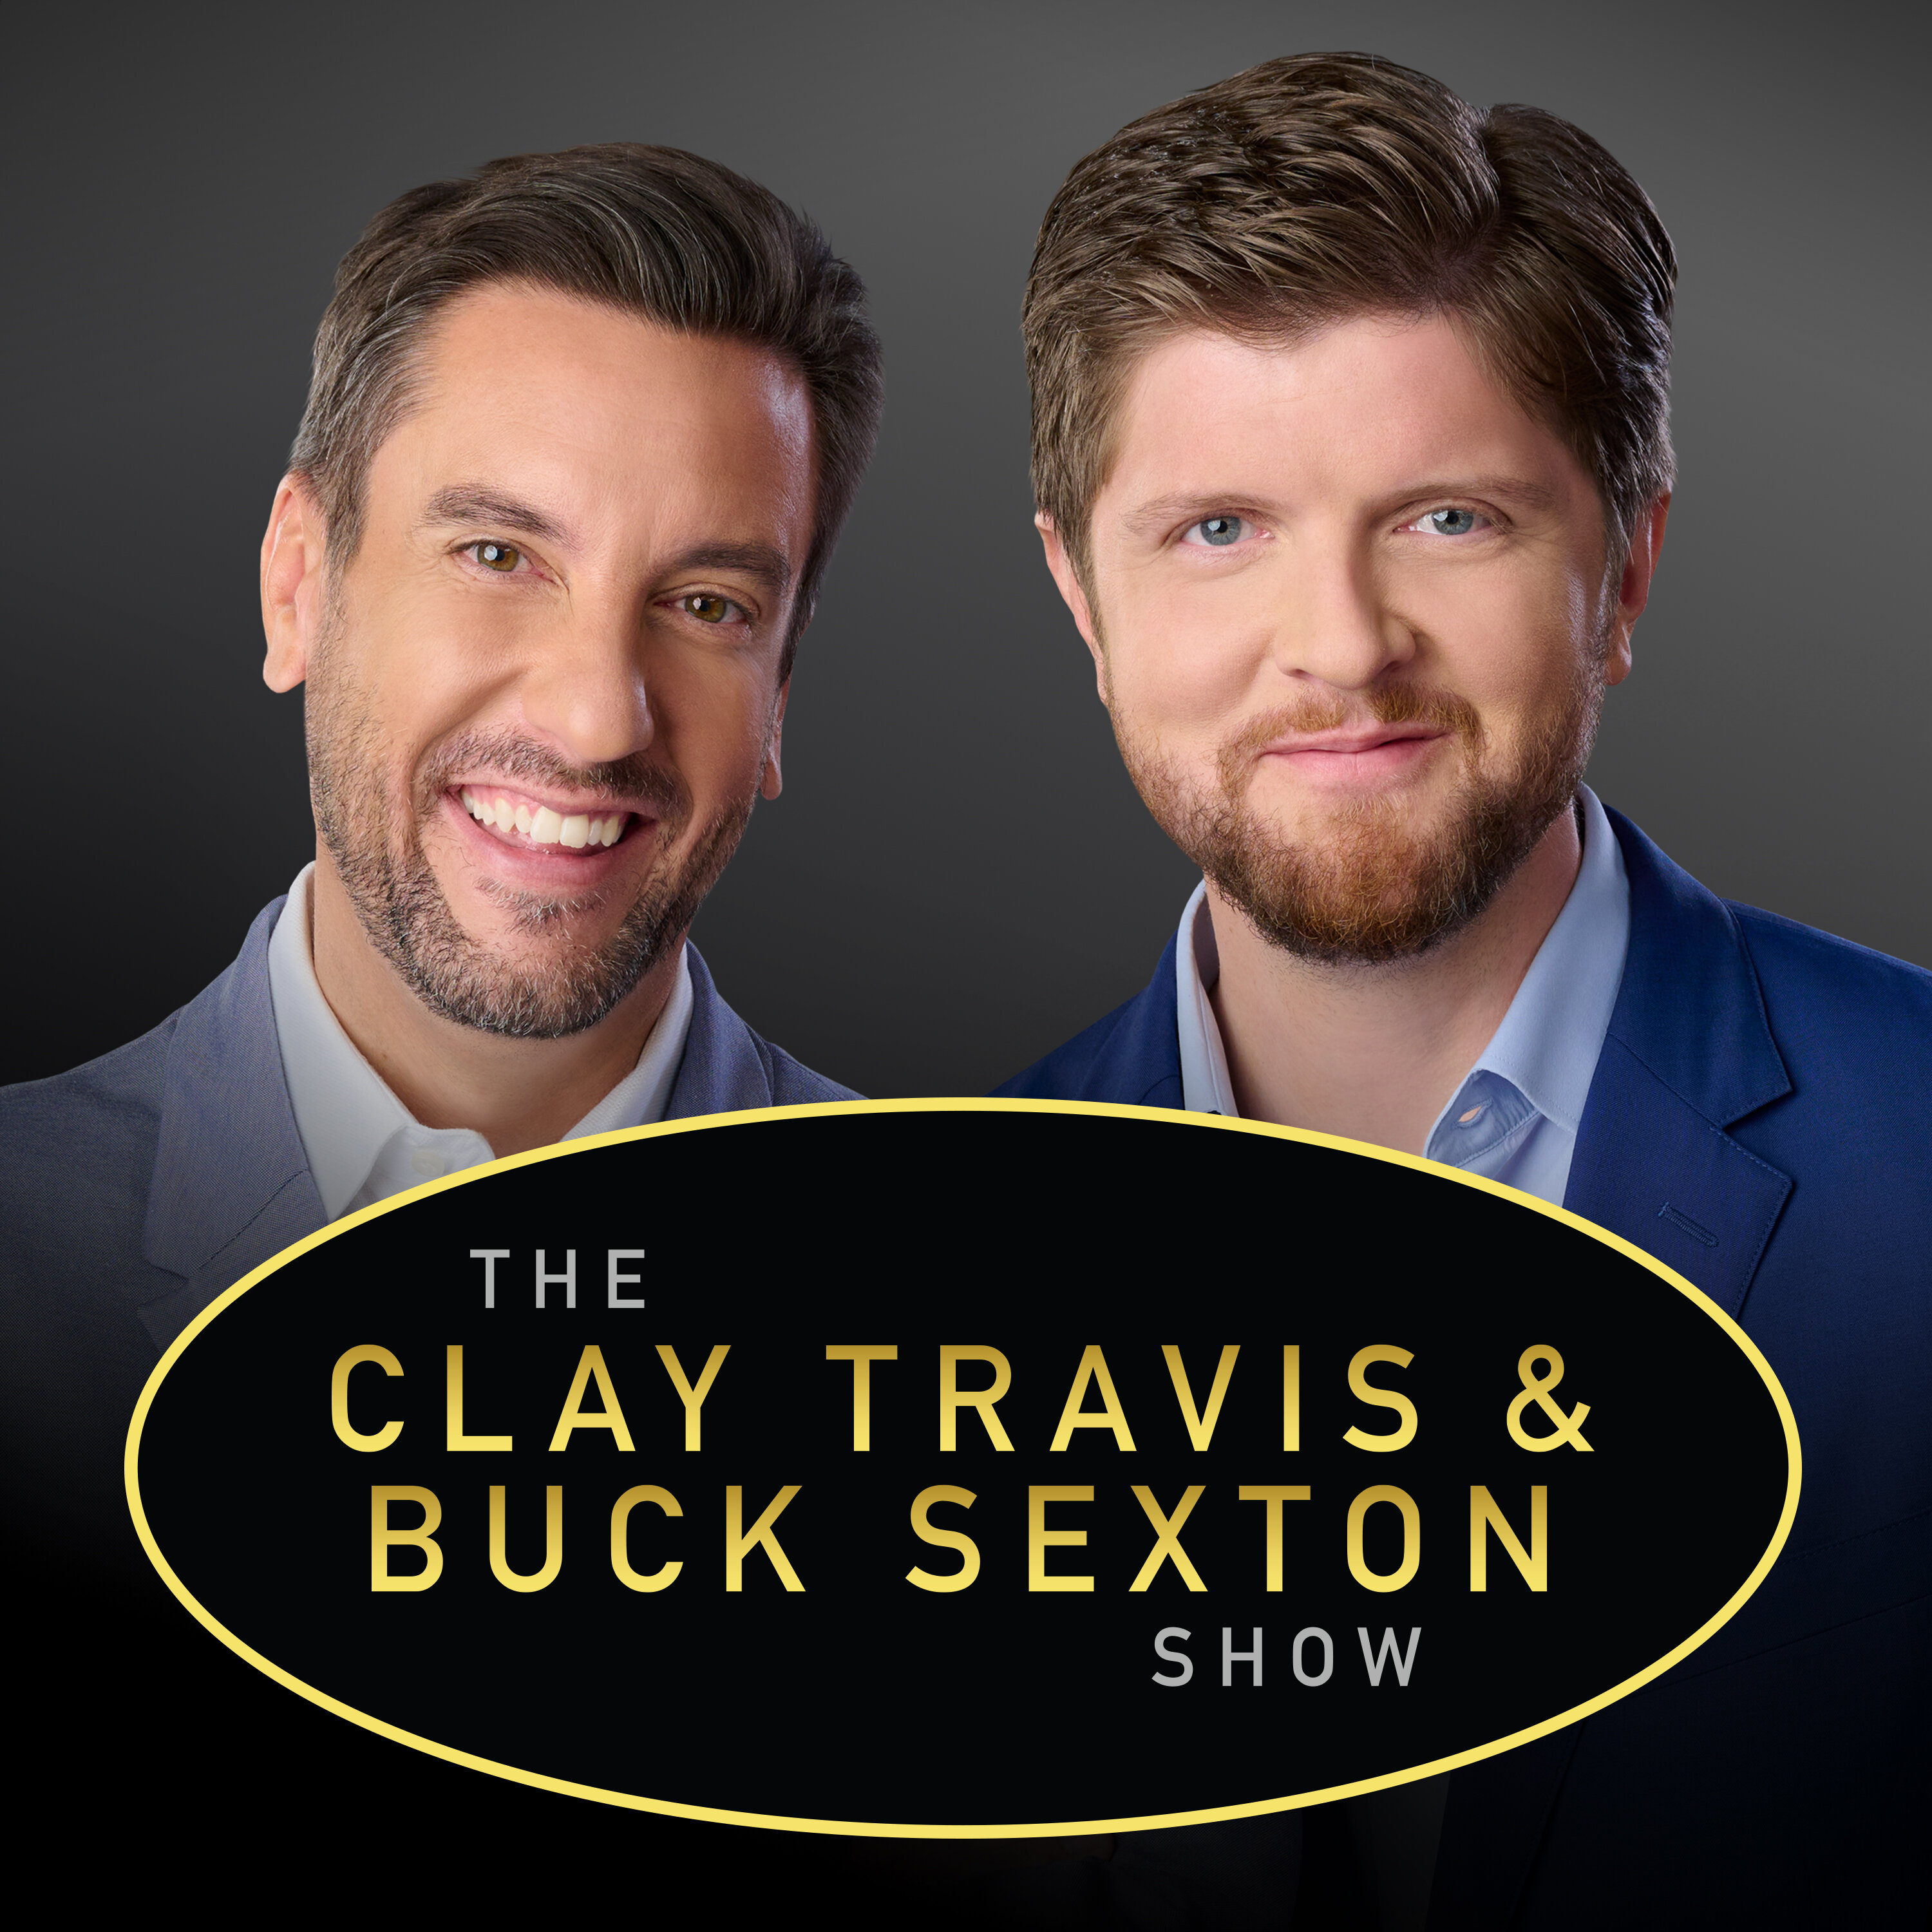 Clay Travis and Buck Sexton Show H2 – Aug 18 2022